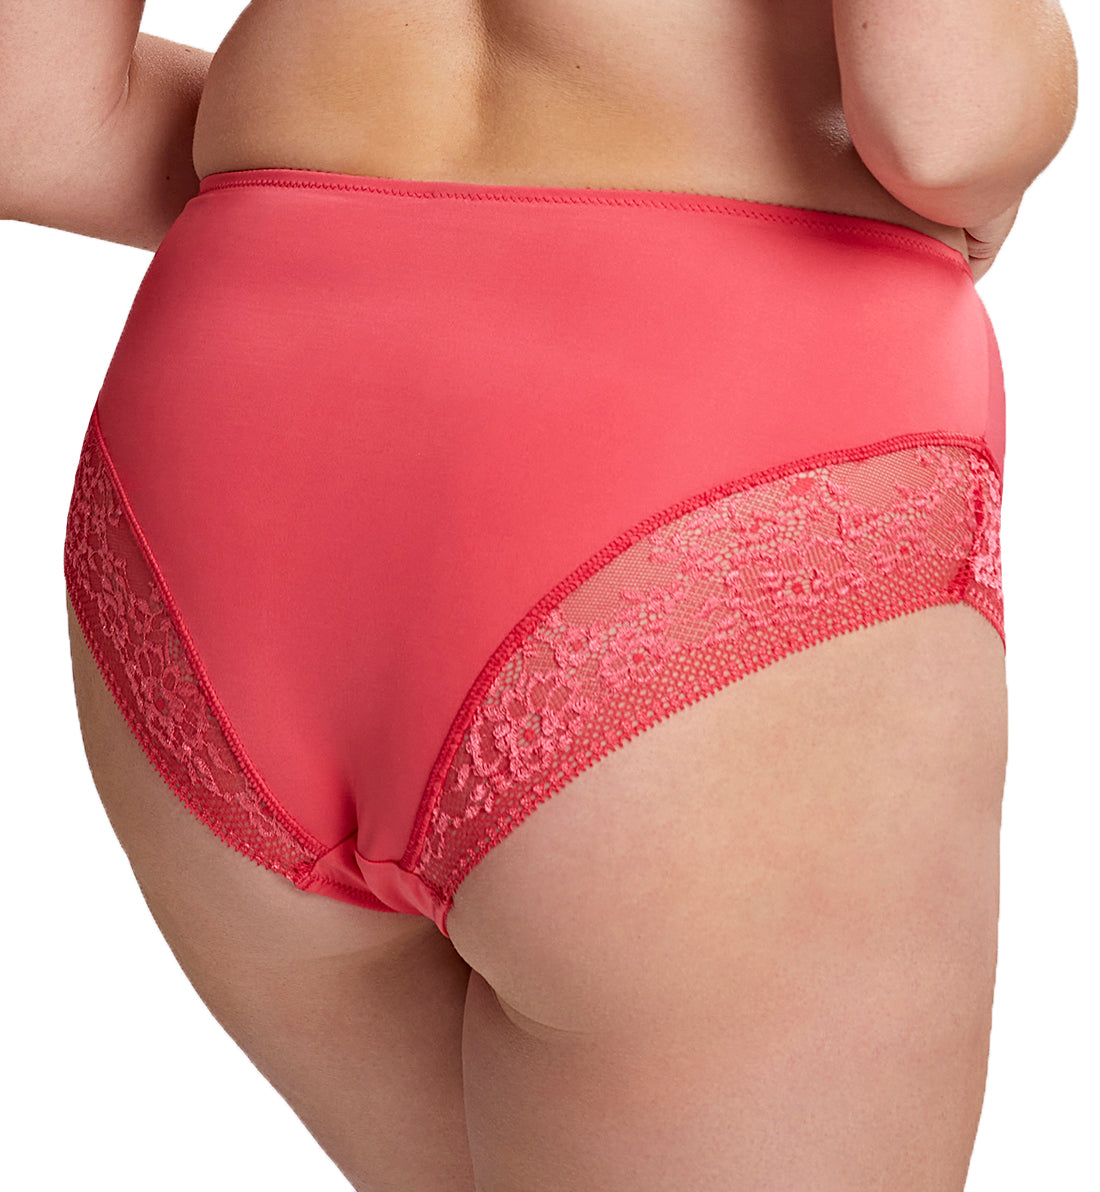 Sculptresse by Panache Roxie Highwaist Brief (9582),Large,Hot Coral - Hot Coral,Large